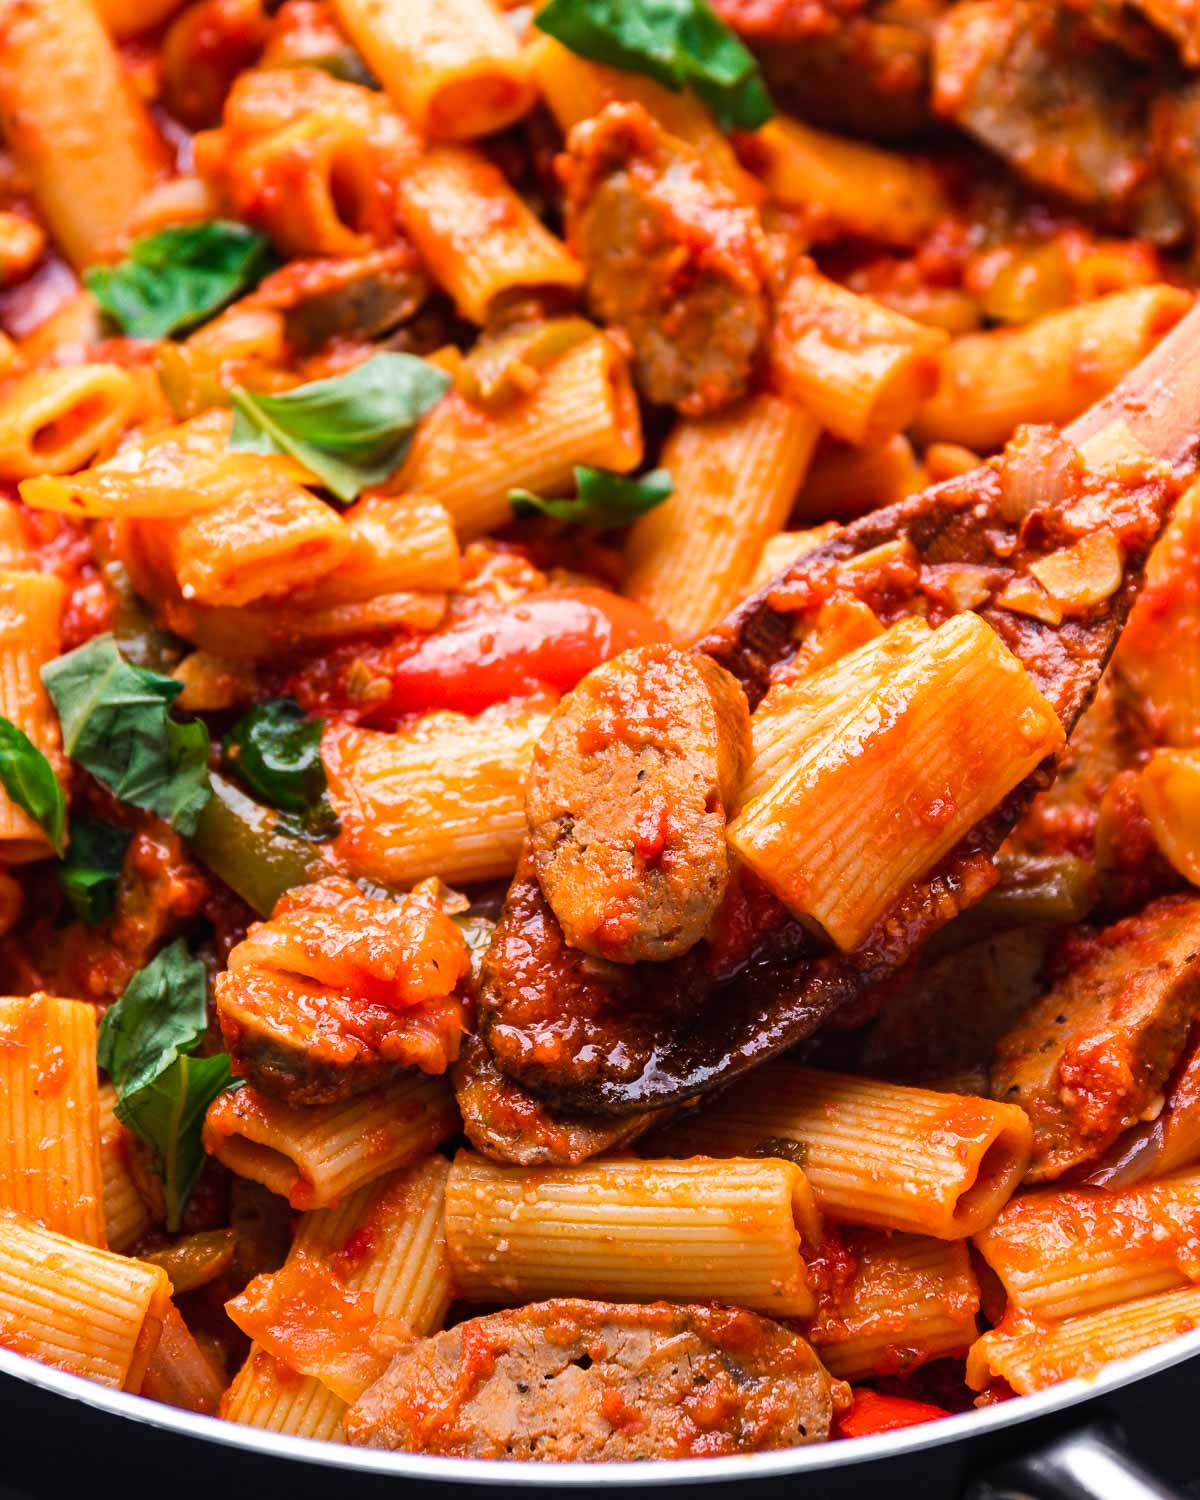 Wooden spoon holding rigatoni and sausage over pan.